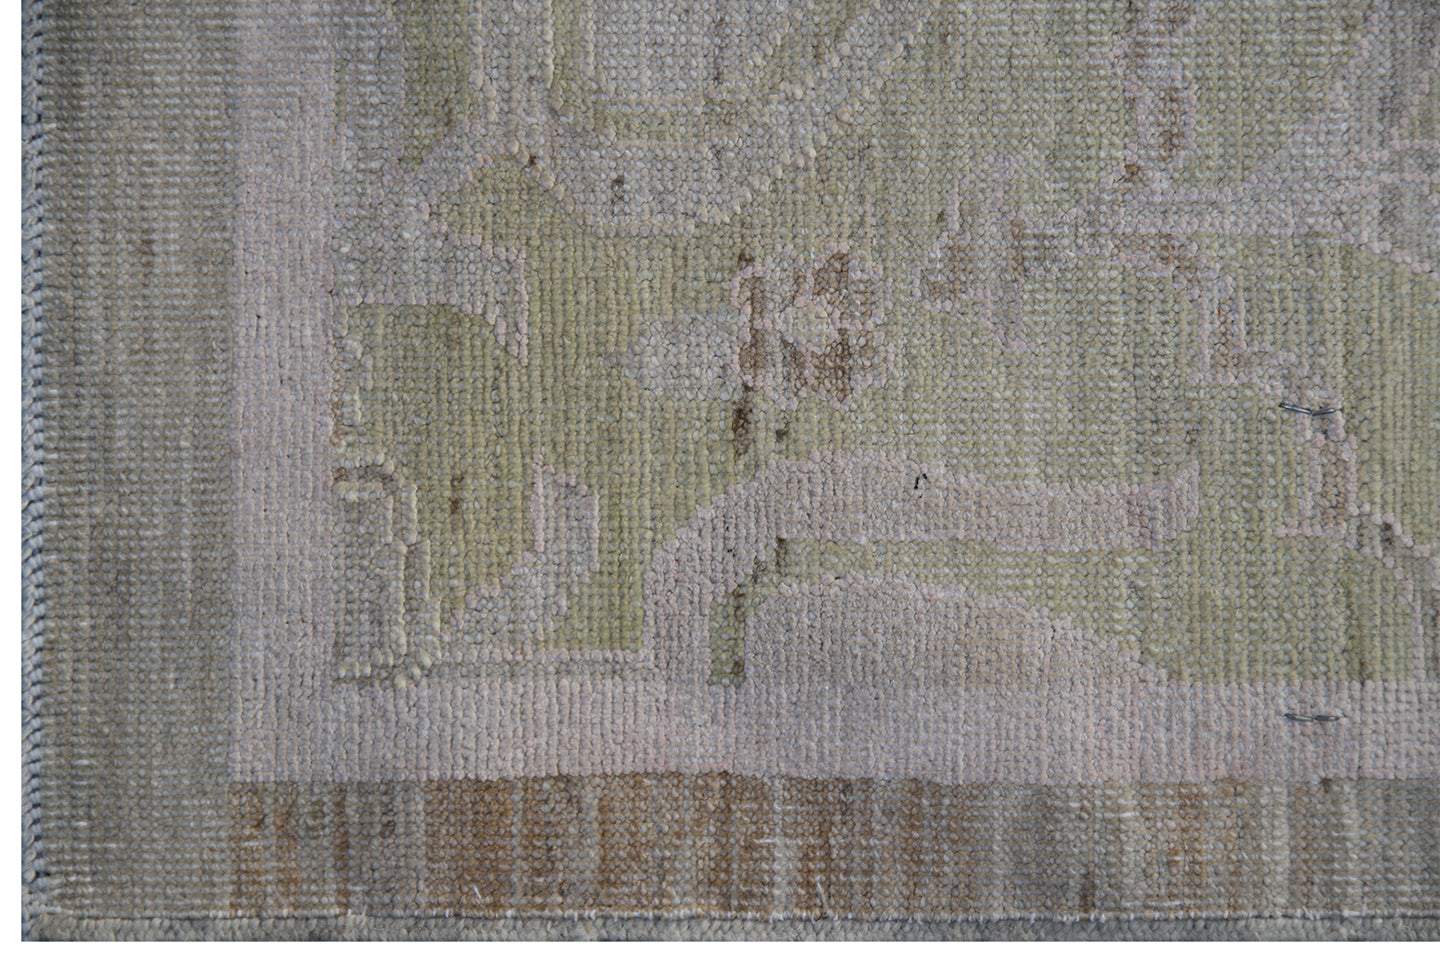 8'x9' Pale Green Faded Ottoman Design Wool and Silk Ariana Transitional Rug